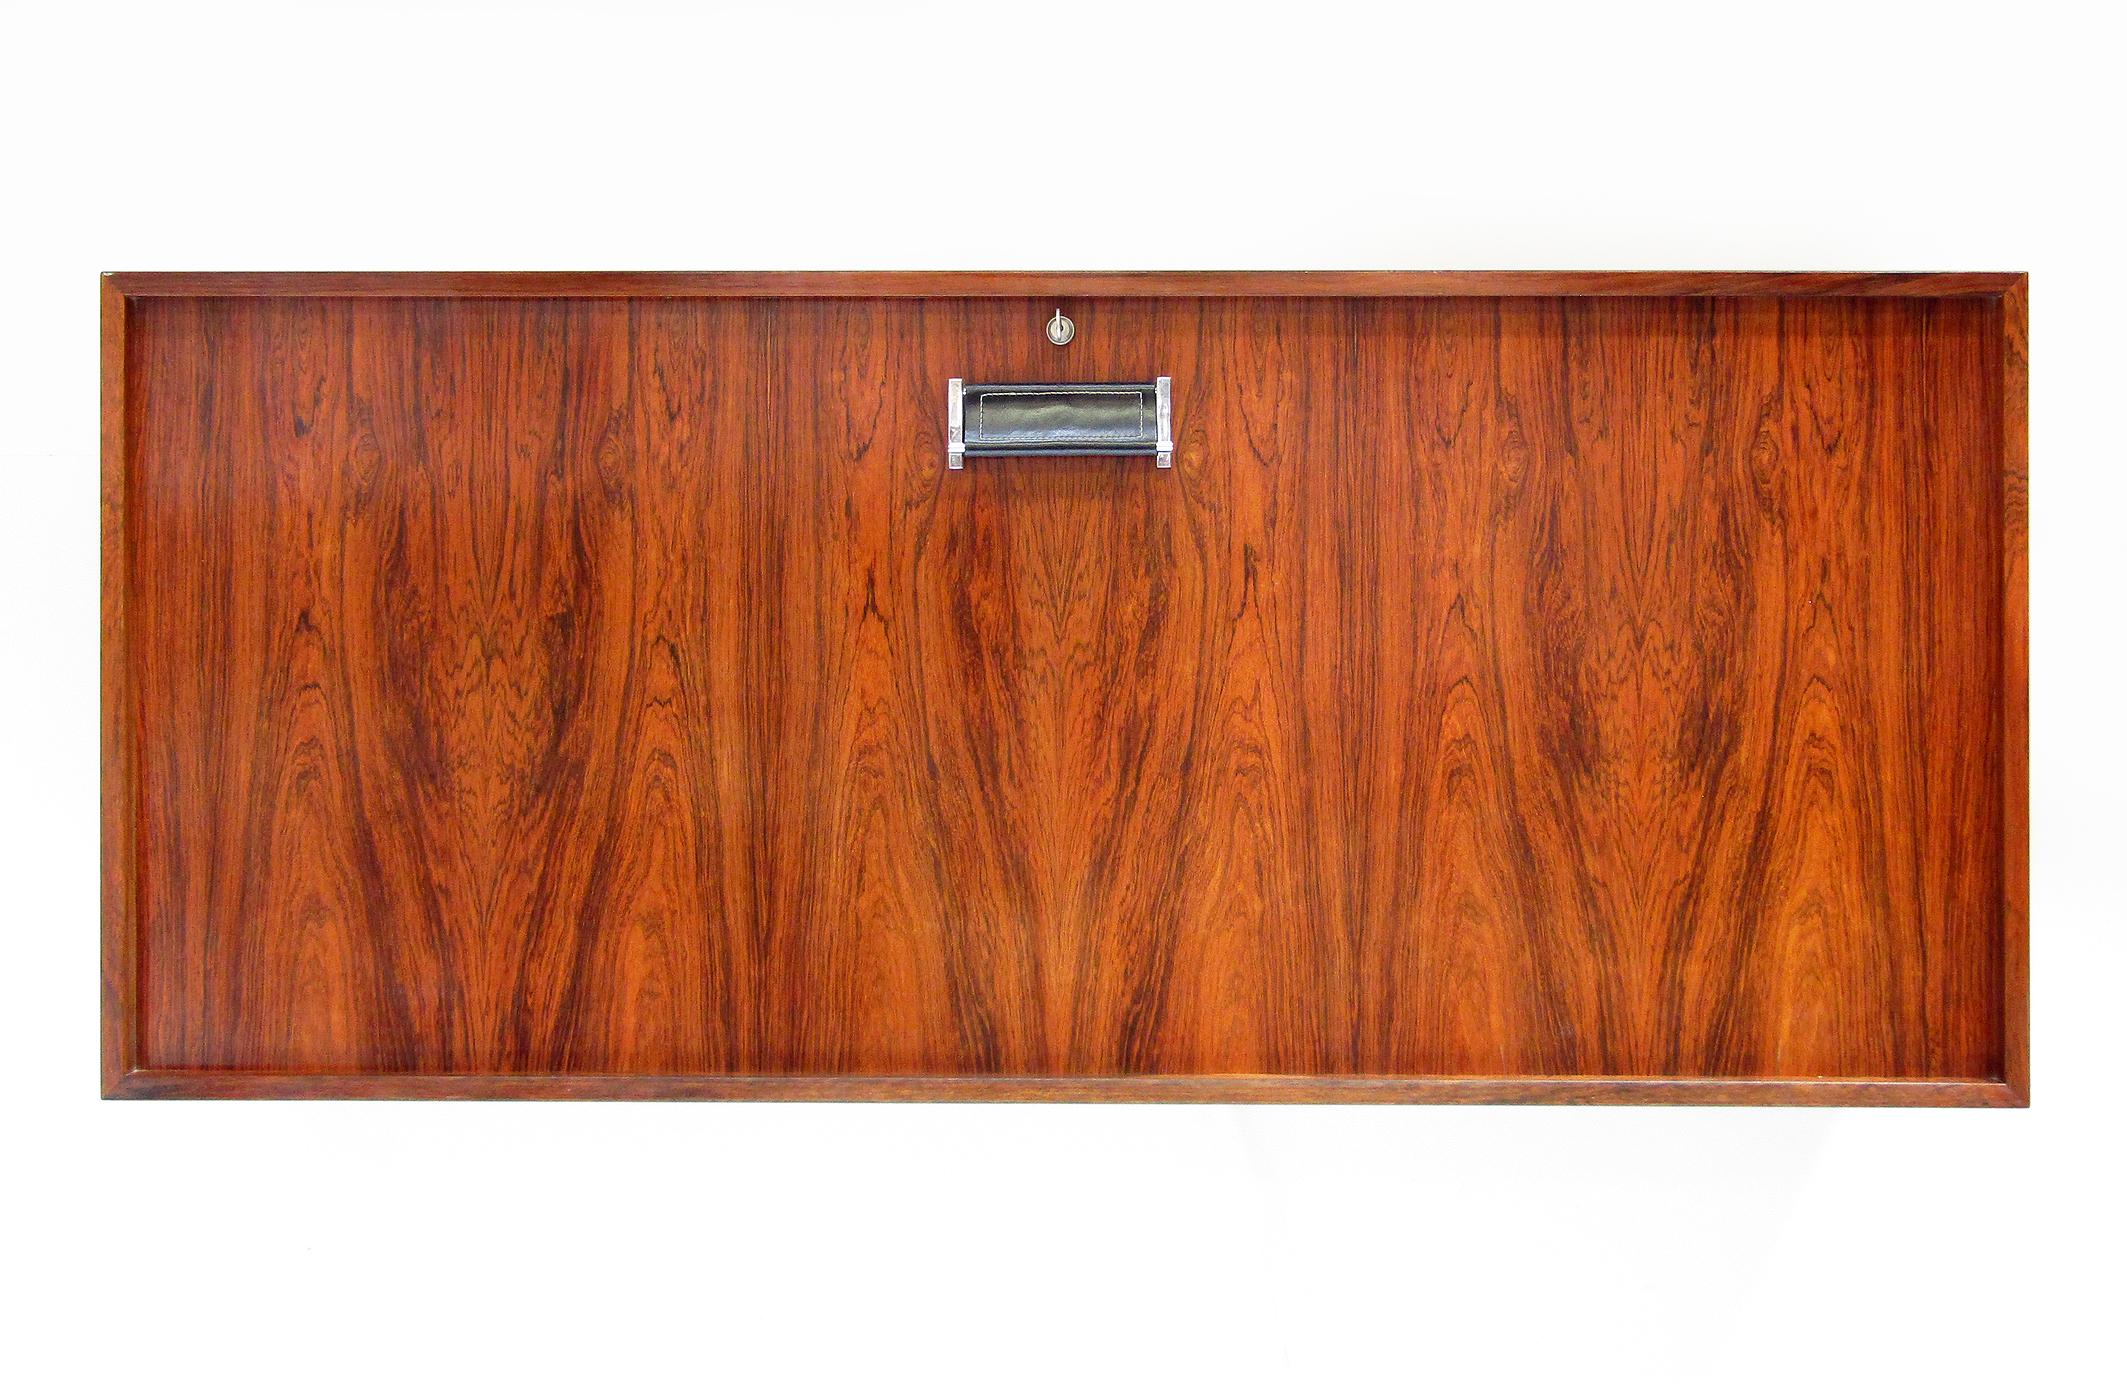 Closed dimensions - height: 55cm, depth: 39cm, width: 127cm
Open dimensions - height: 78cm, depth: 70cm, width: 127cm

A beautifully figured 1960s Danish rosewood wall-mounted bar or desk by Erik Buch for Dyrlund.

Of large dimensions, this